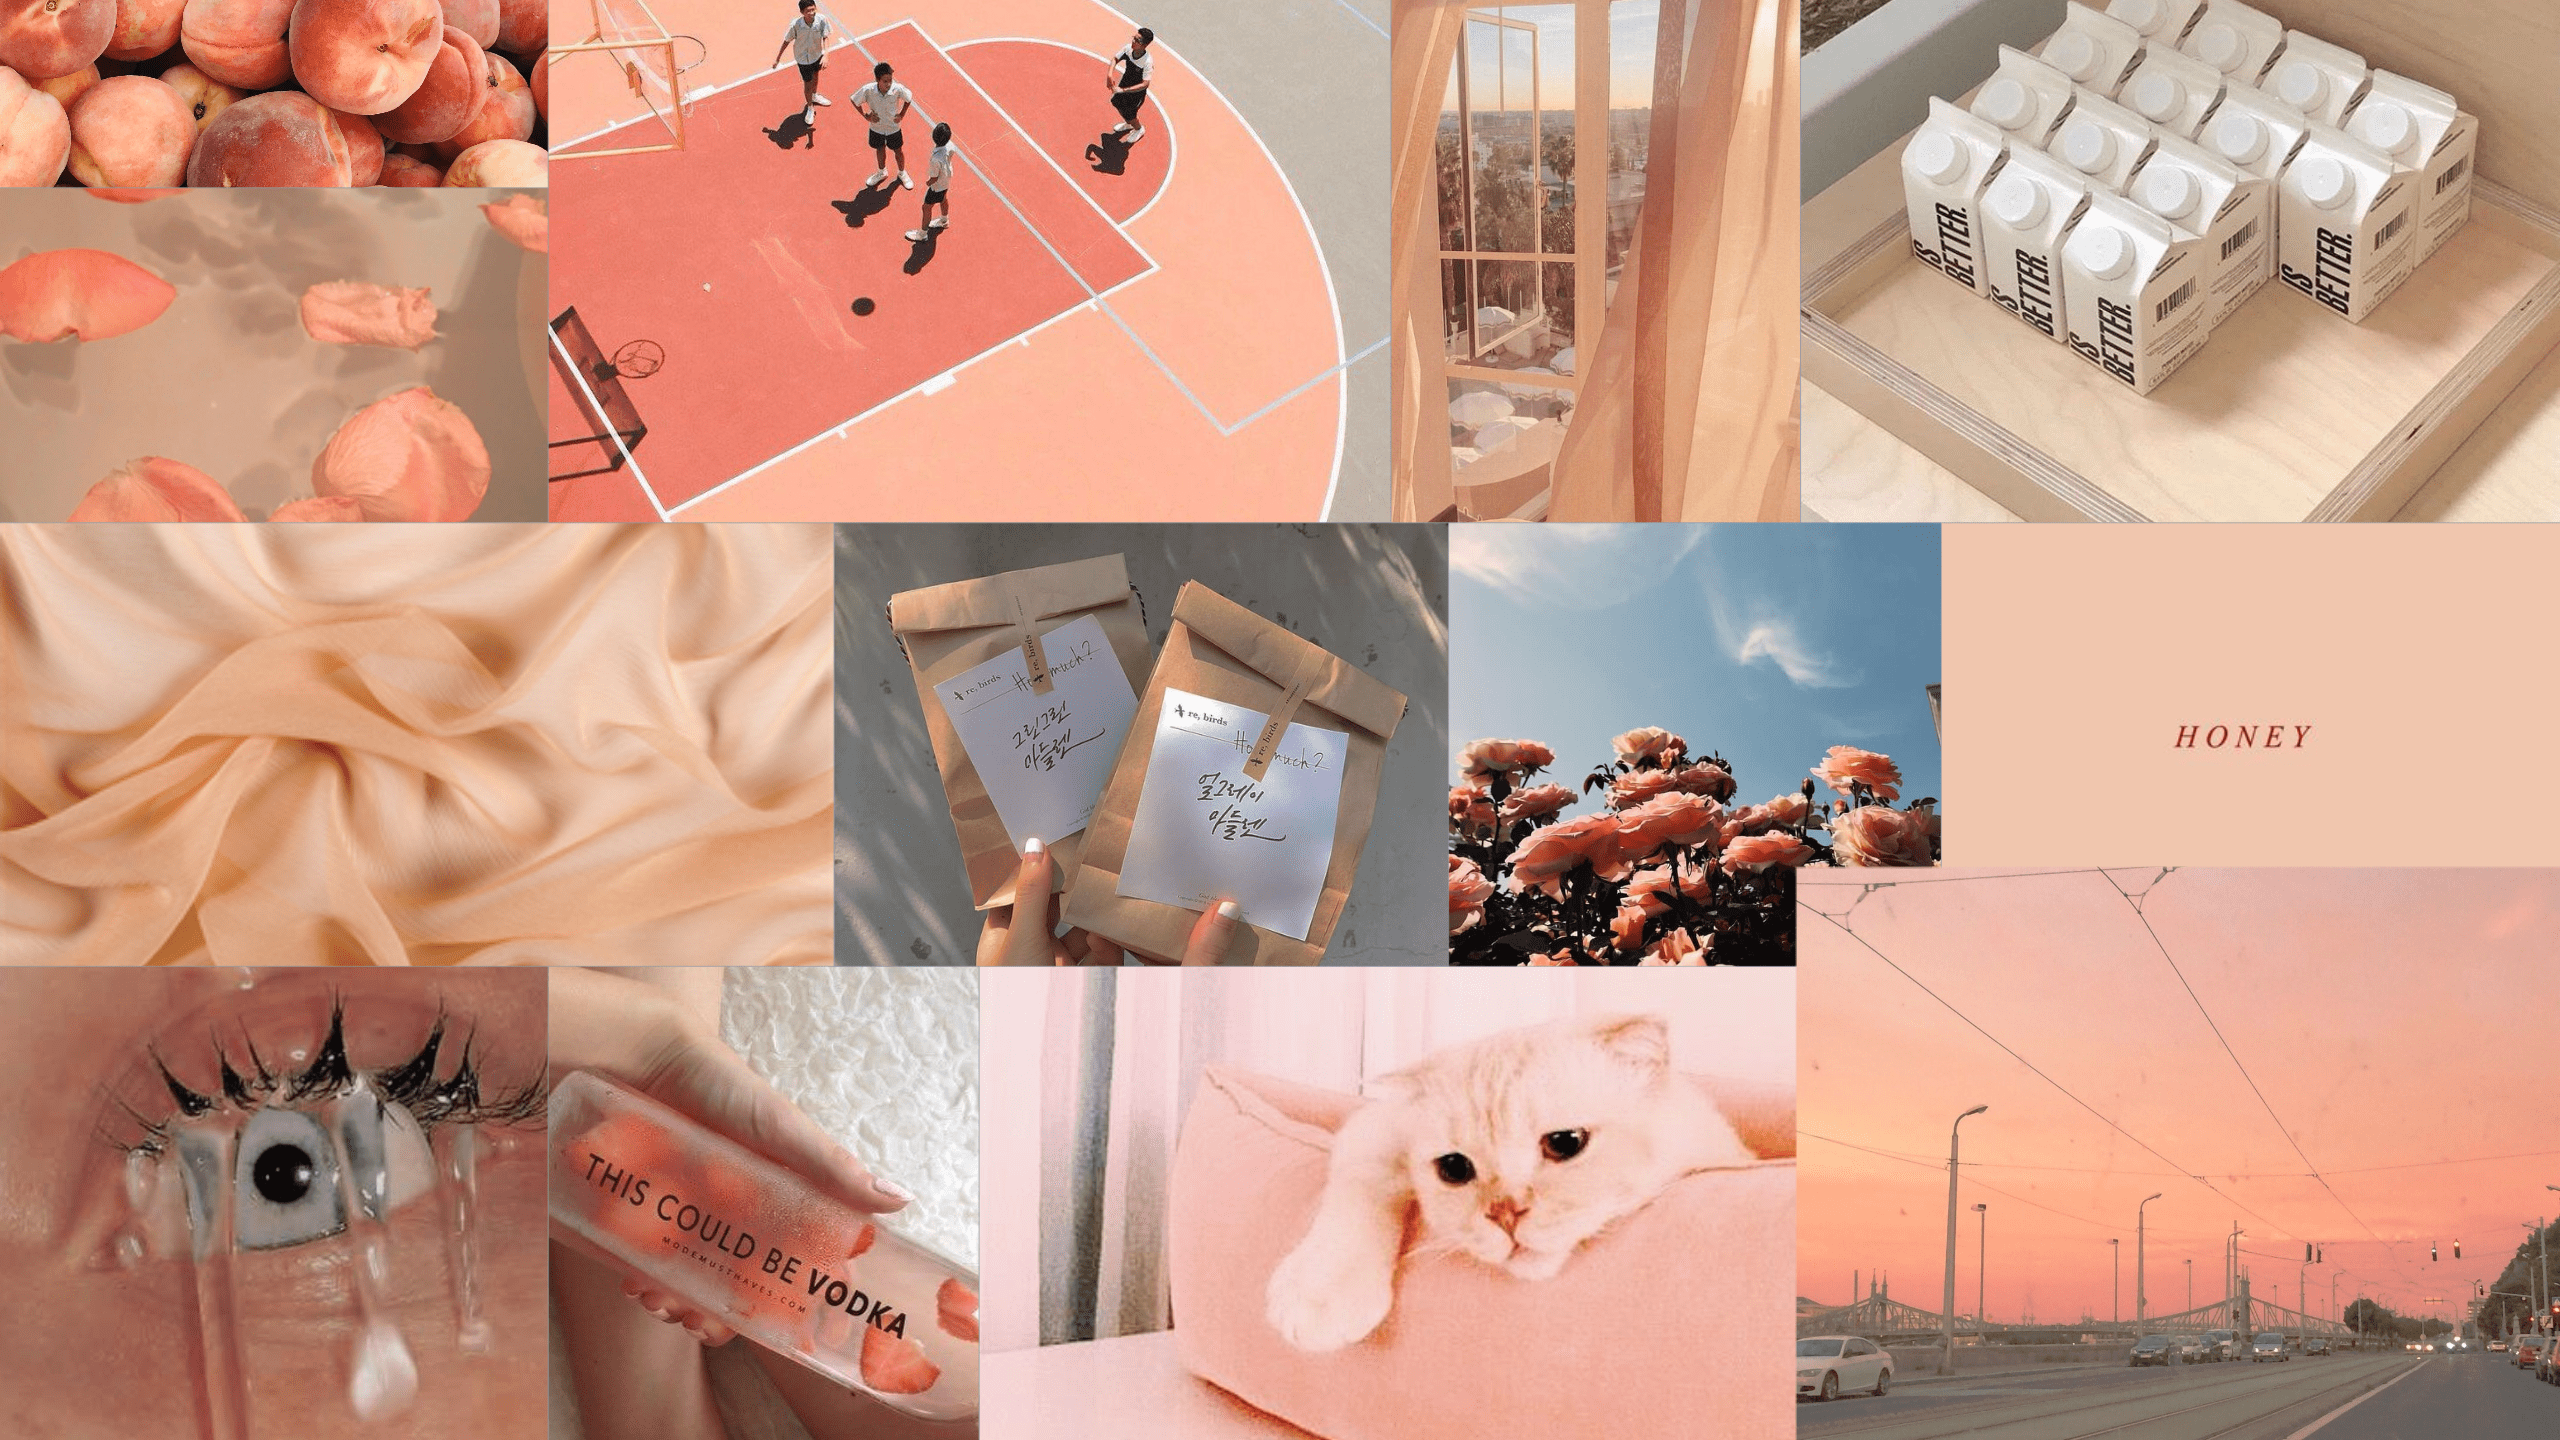 A collage of images including a basketball court, a sunset, a cat, and a t-shirt that says 